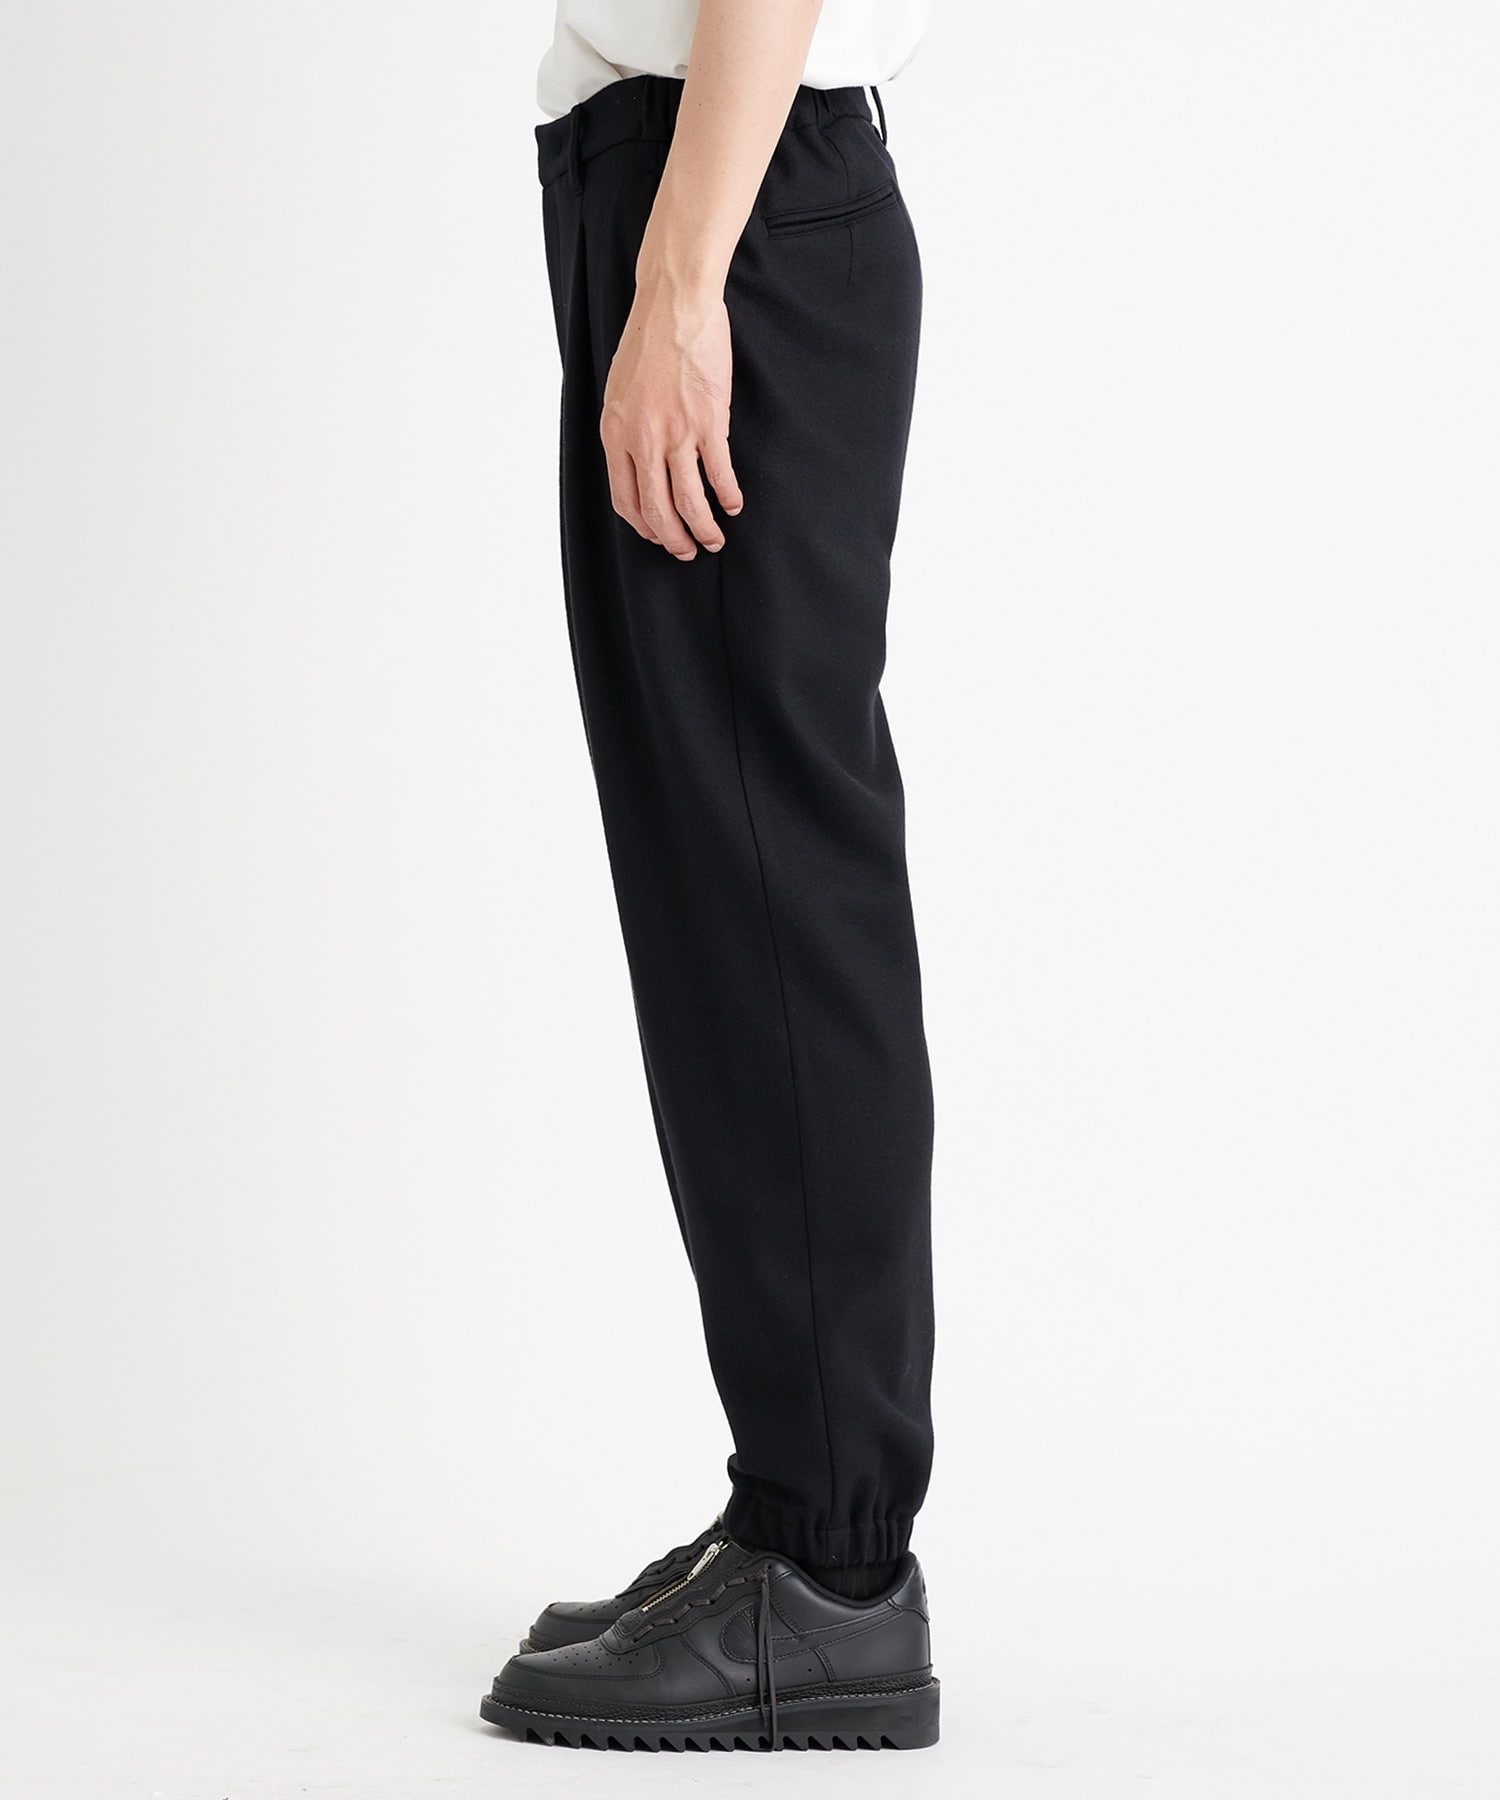 Flanne Lana Cashmere Touch Easy Pants THE TOKYO